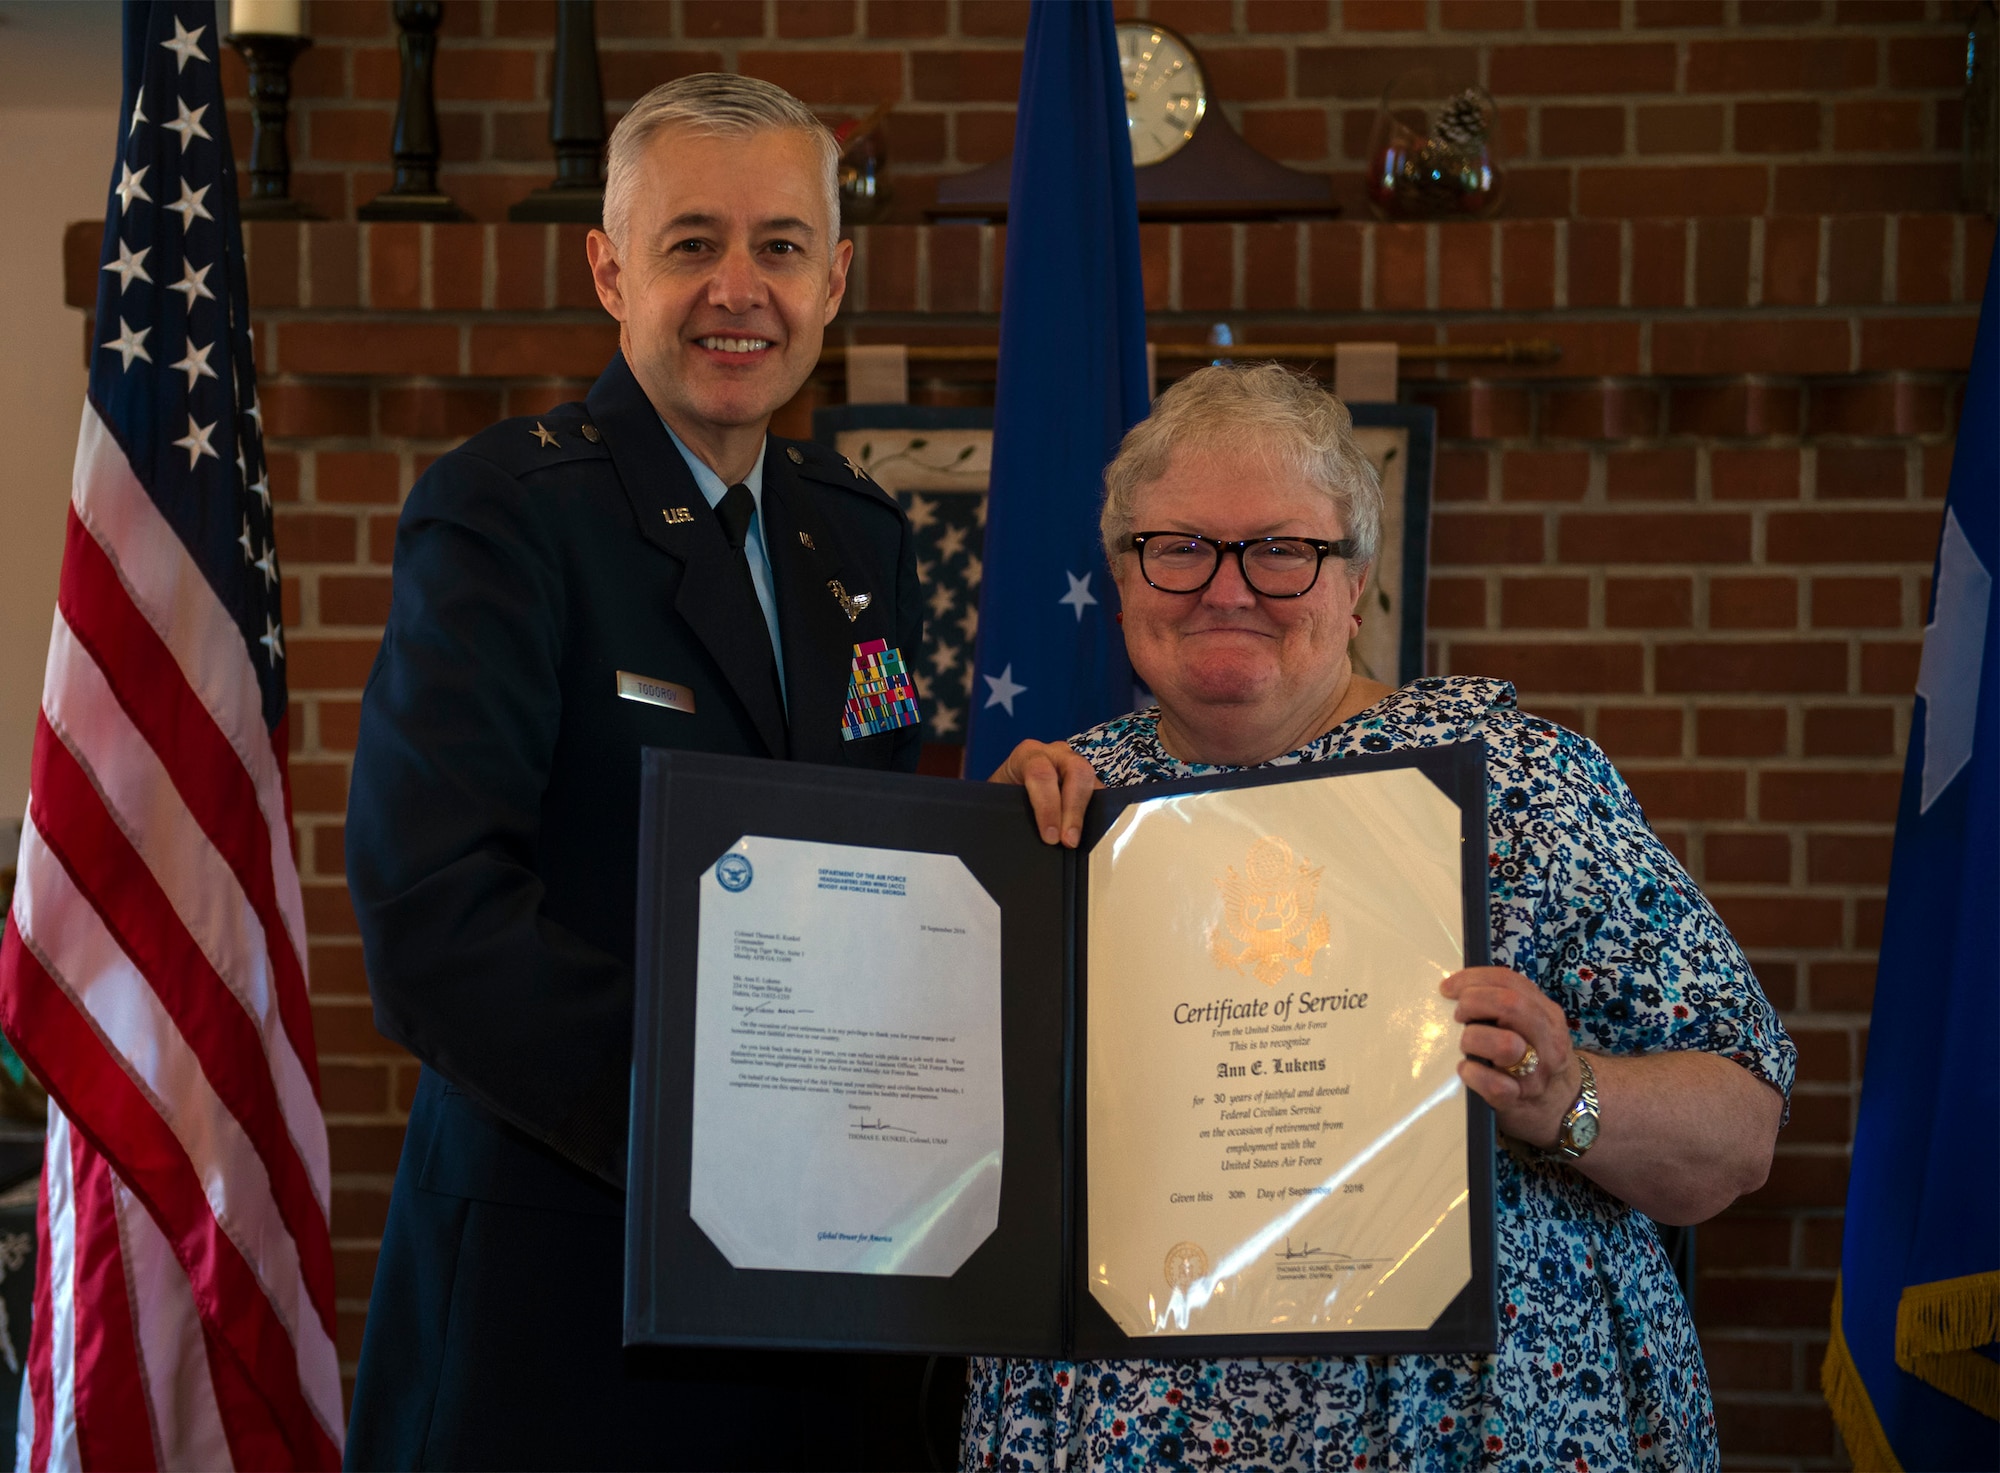 U.S. Air Force Retired Brigadier General Kenneth Todorov, former 23d Wing commander, presents a retirement certificate to Ann Lukens, 23d Force Support Squadron school liaison officer, during her retirement ceremony, Sept. 30, 2016, at Moody Air Force Base, Ga. Prior to her school liaison officer duties, Lukens served as the Airman & Family Readiness director at Moody from 1989 to 2008. (U.S. Air Force photo by Airman 1st Class Greg Nash)